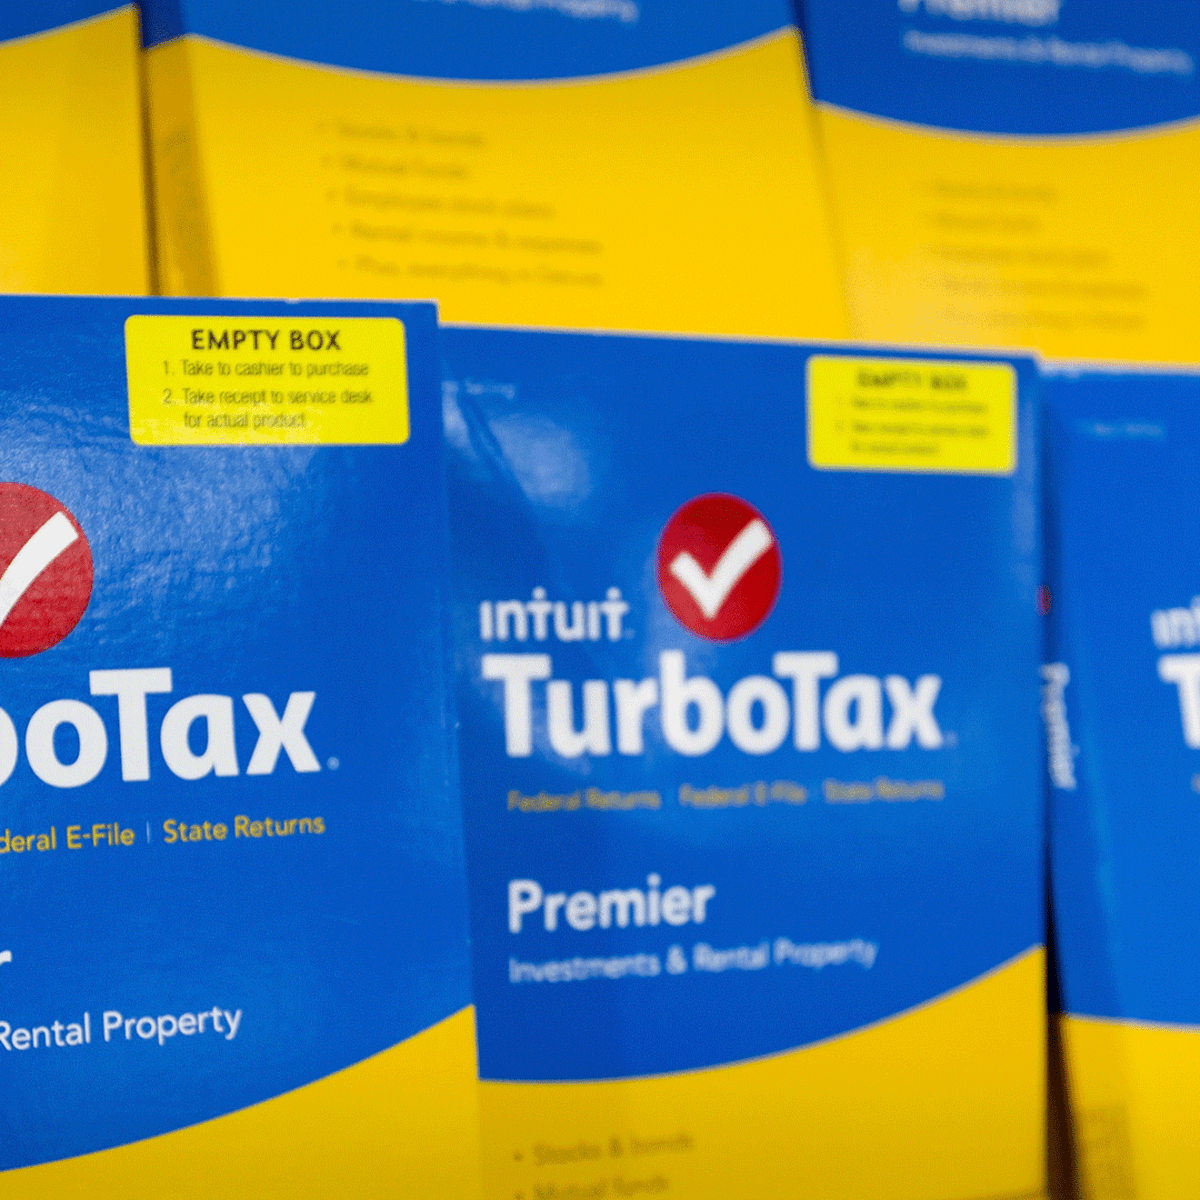 buy turbotax 2016 home and business